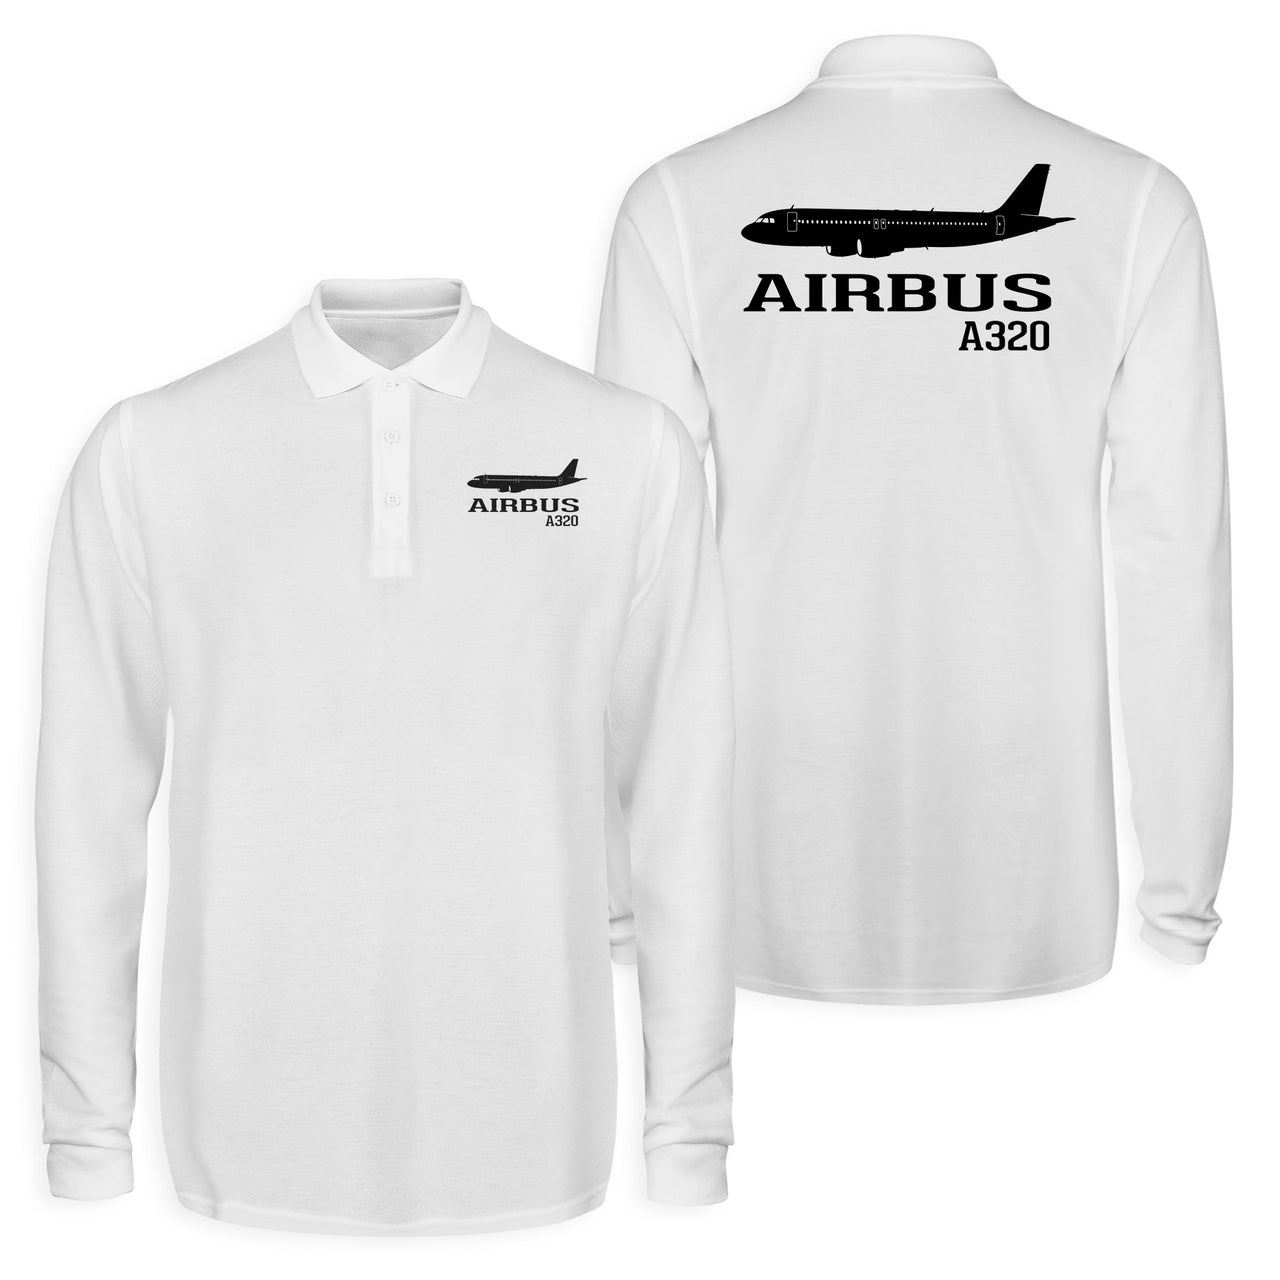 Airbus A320 Printed Designed Long Sleeve Polo T-Shirts (Double-Side)